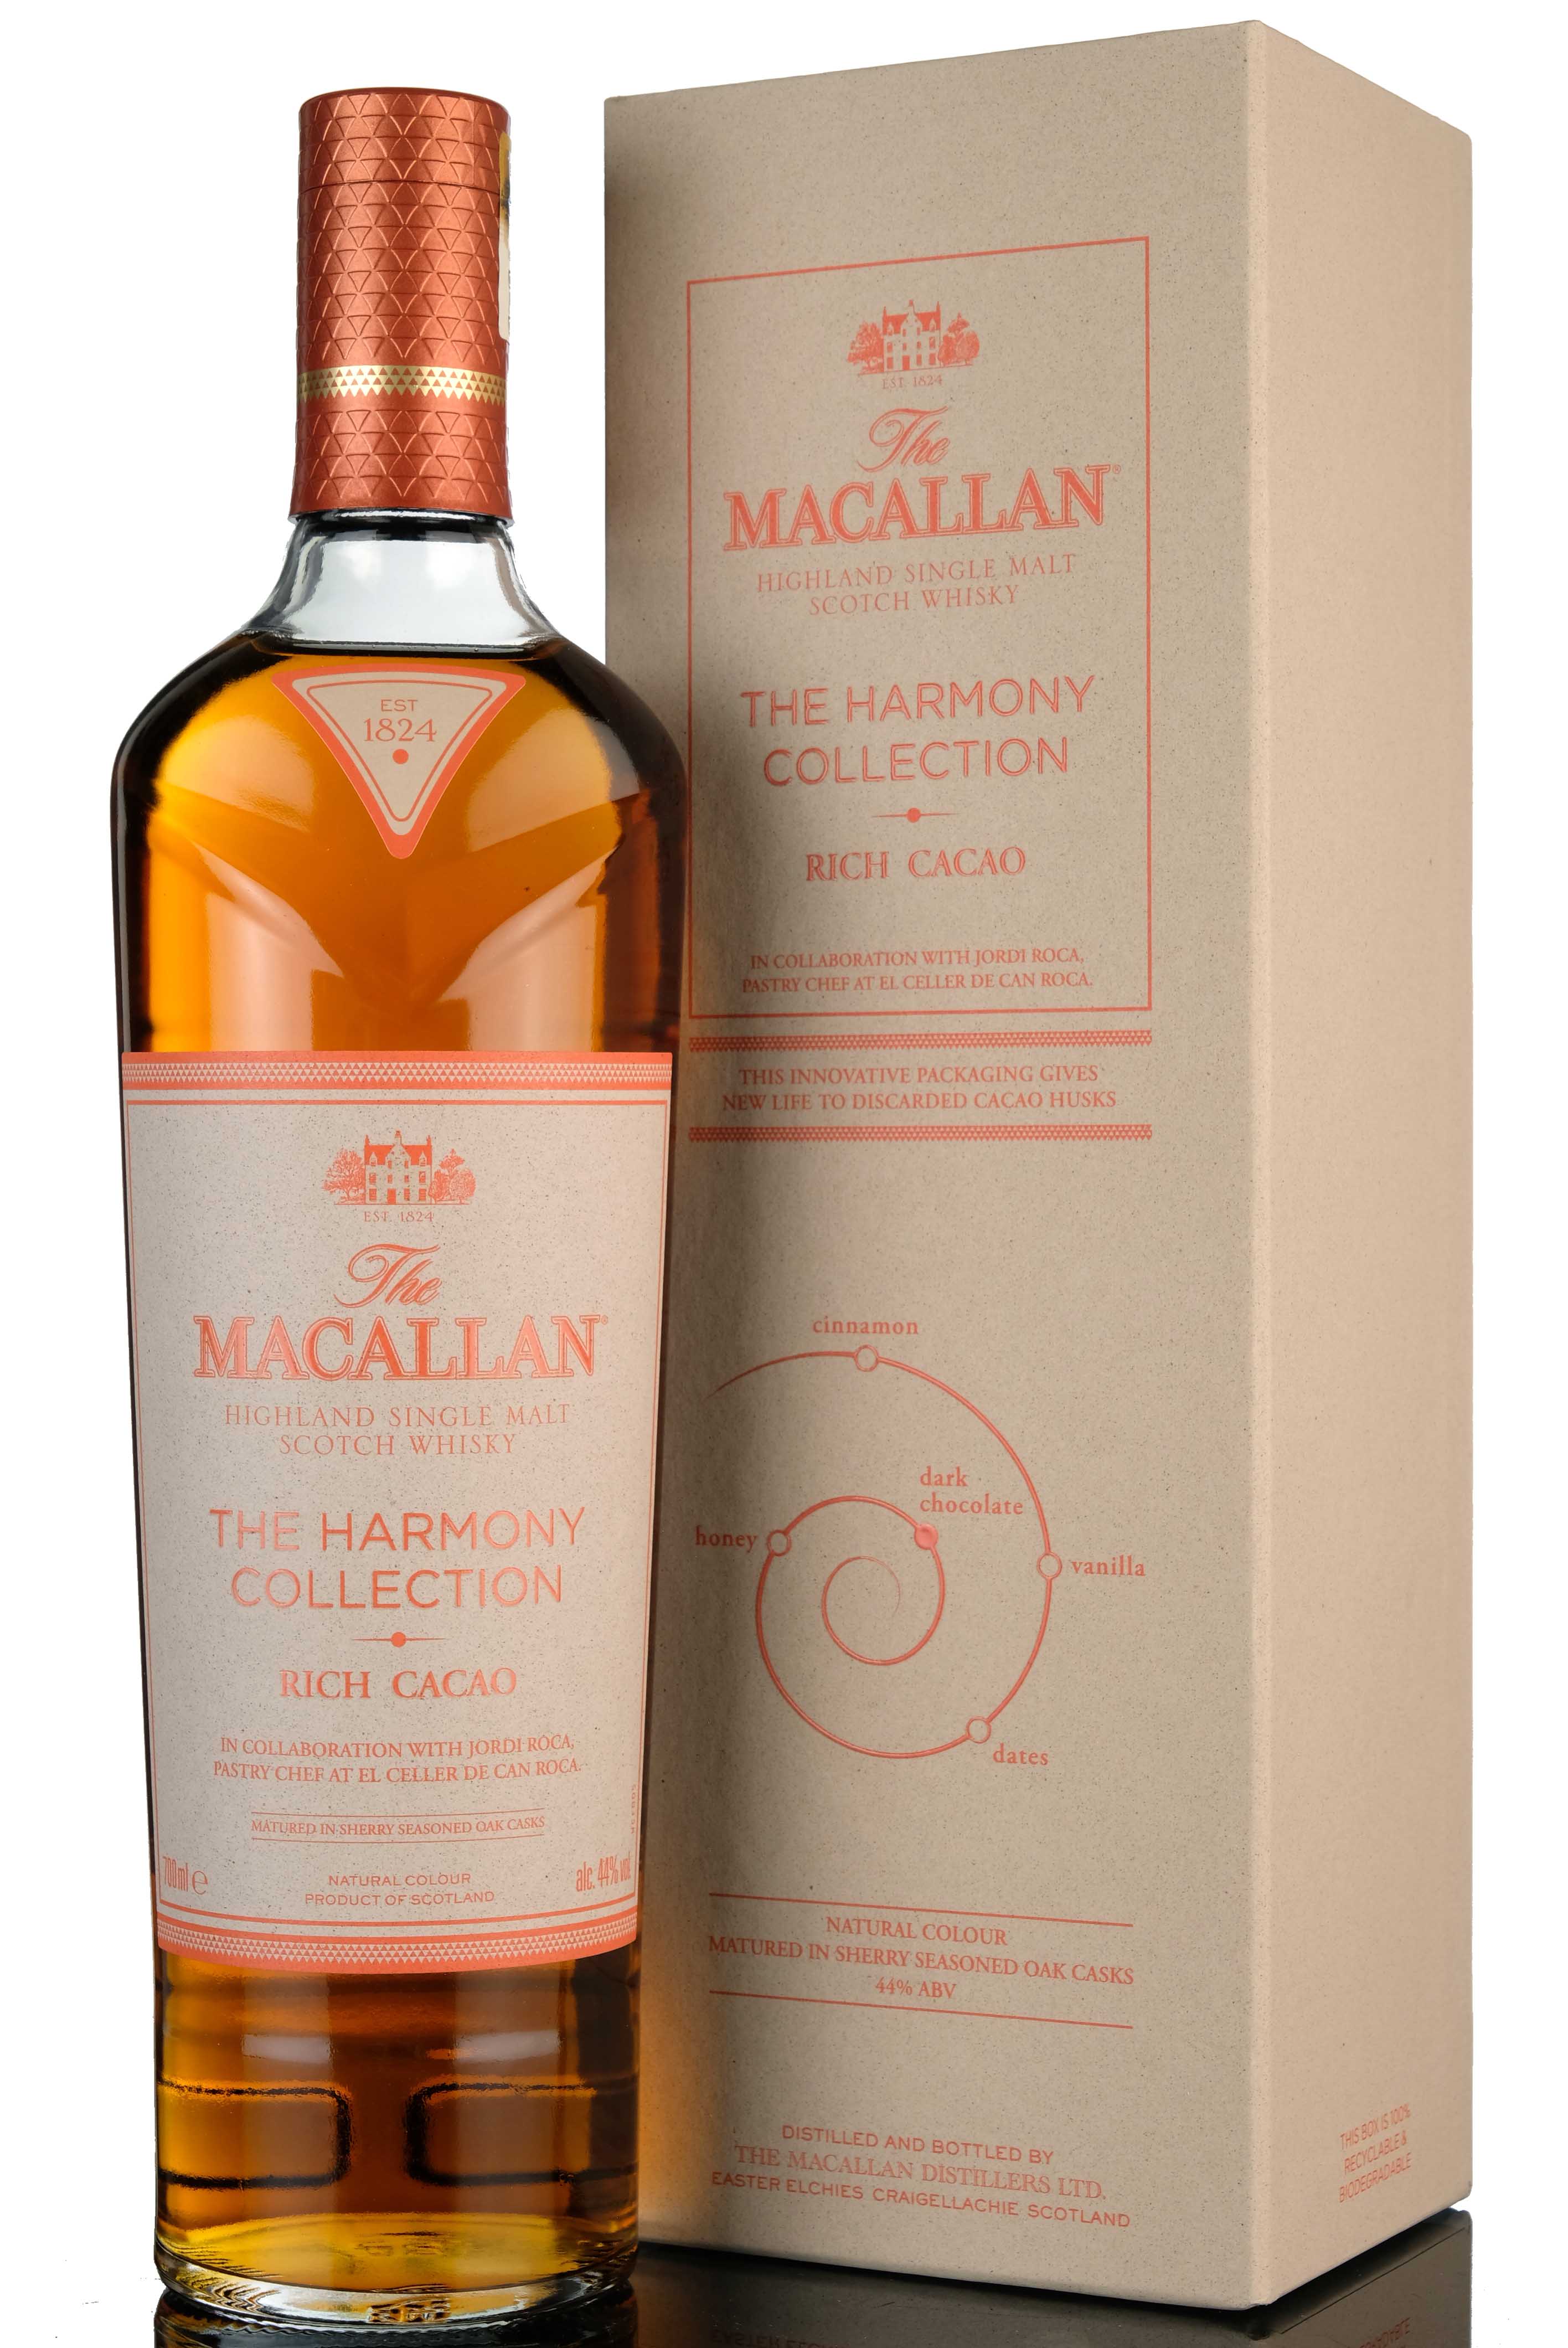 Macallan The Harmony Collection - Rich Cacao